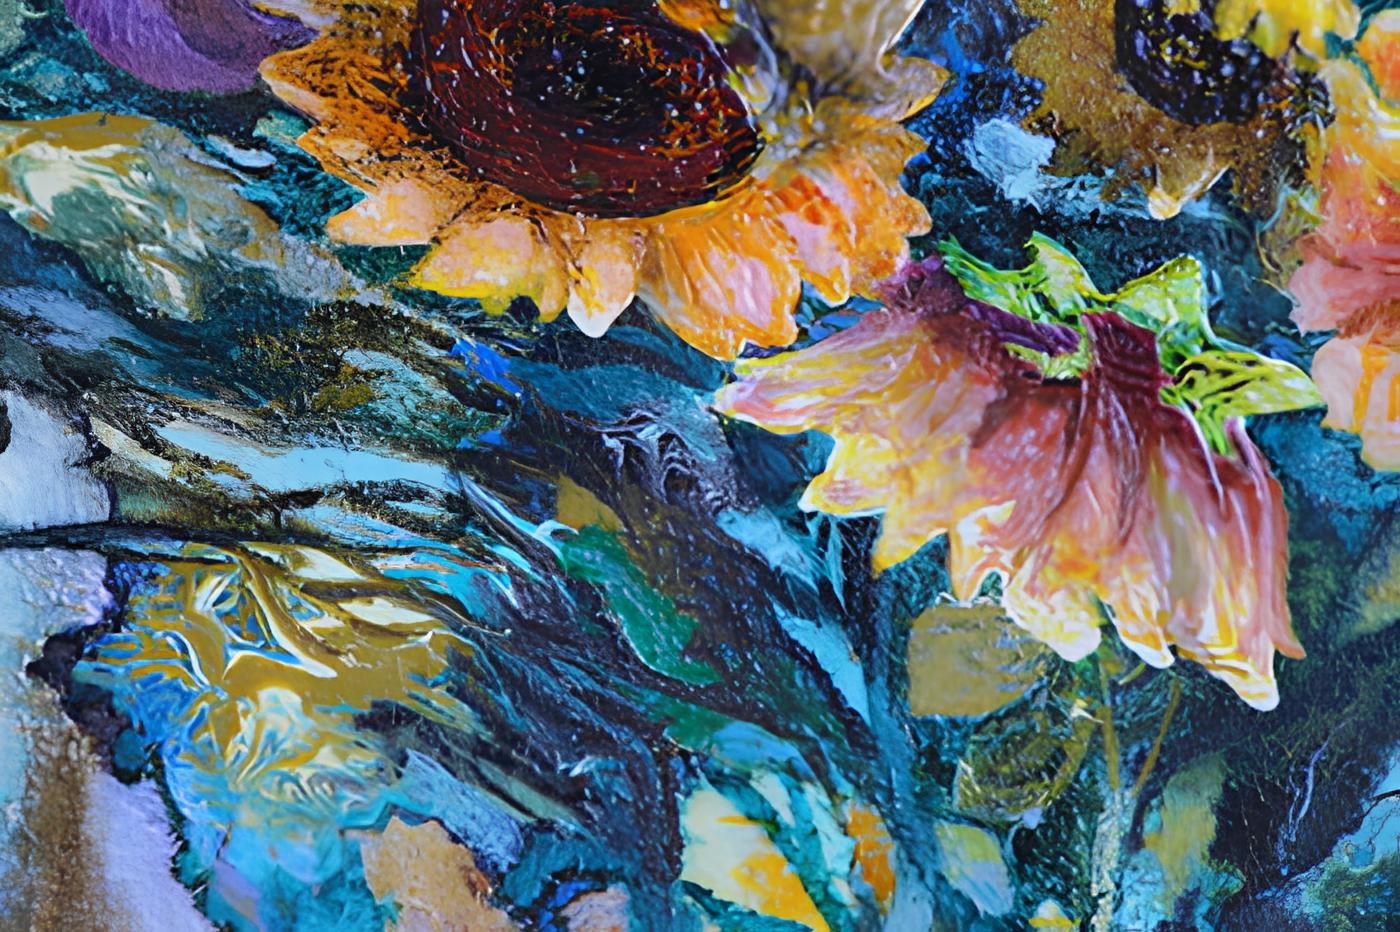 In my creation, I've melded acrylic and oil with relief printing to craft texture that breathes life into each sun-kissed petal, expressing nature's resilience and vibrancy. Drawing from fine art's depth, figurative realism, and impressionism's play